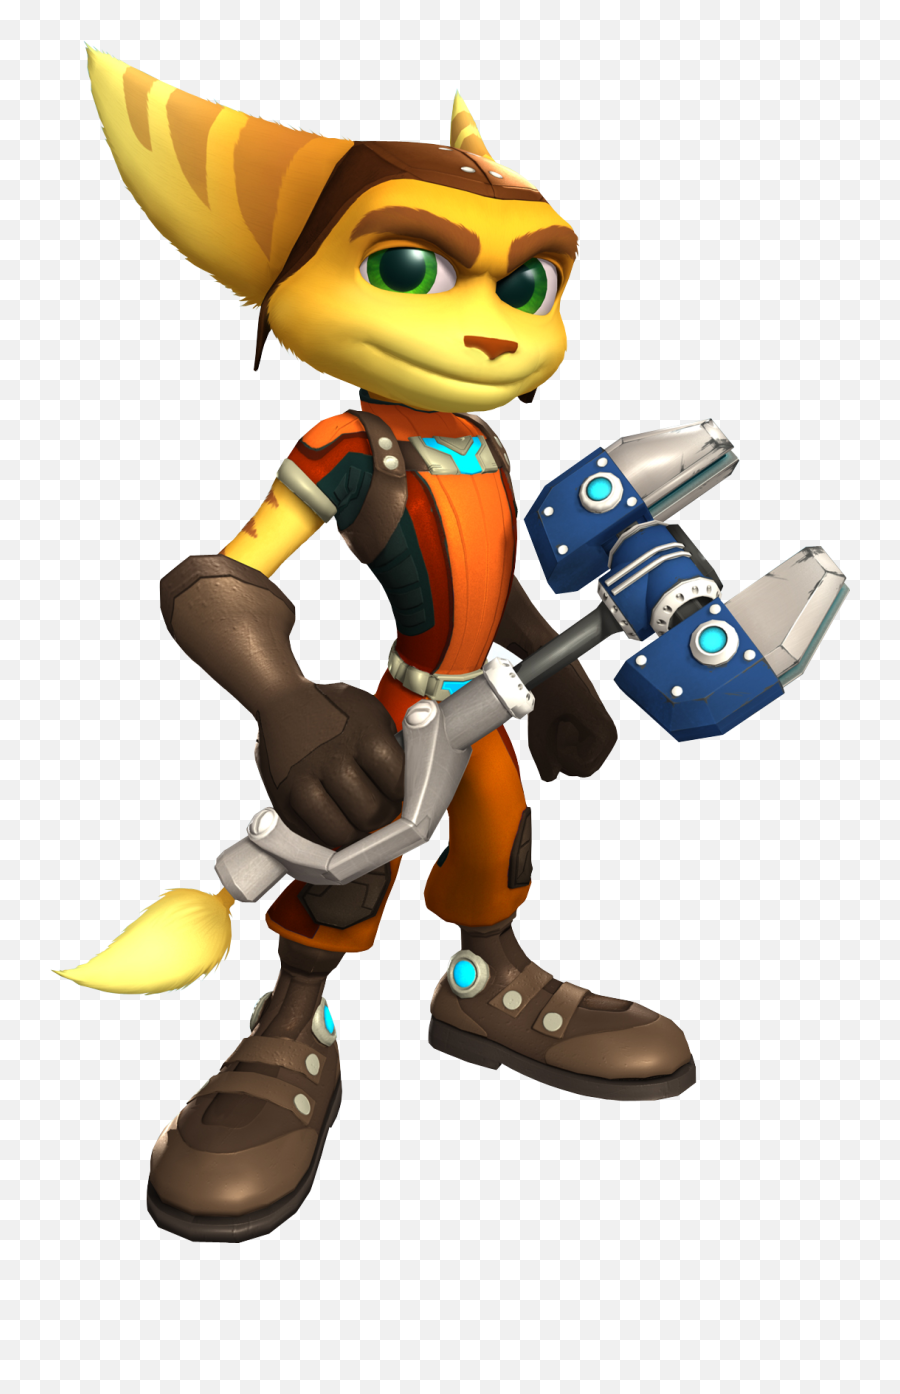 Download Free Png Image - Ratchet And Clank All 4 One Ratchet,Ratchet Png